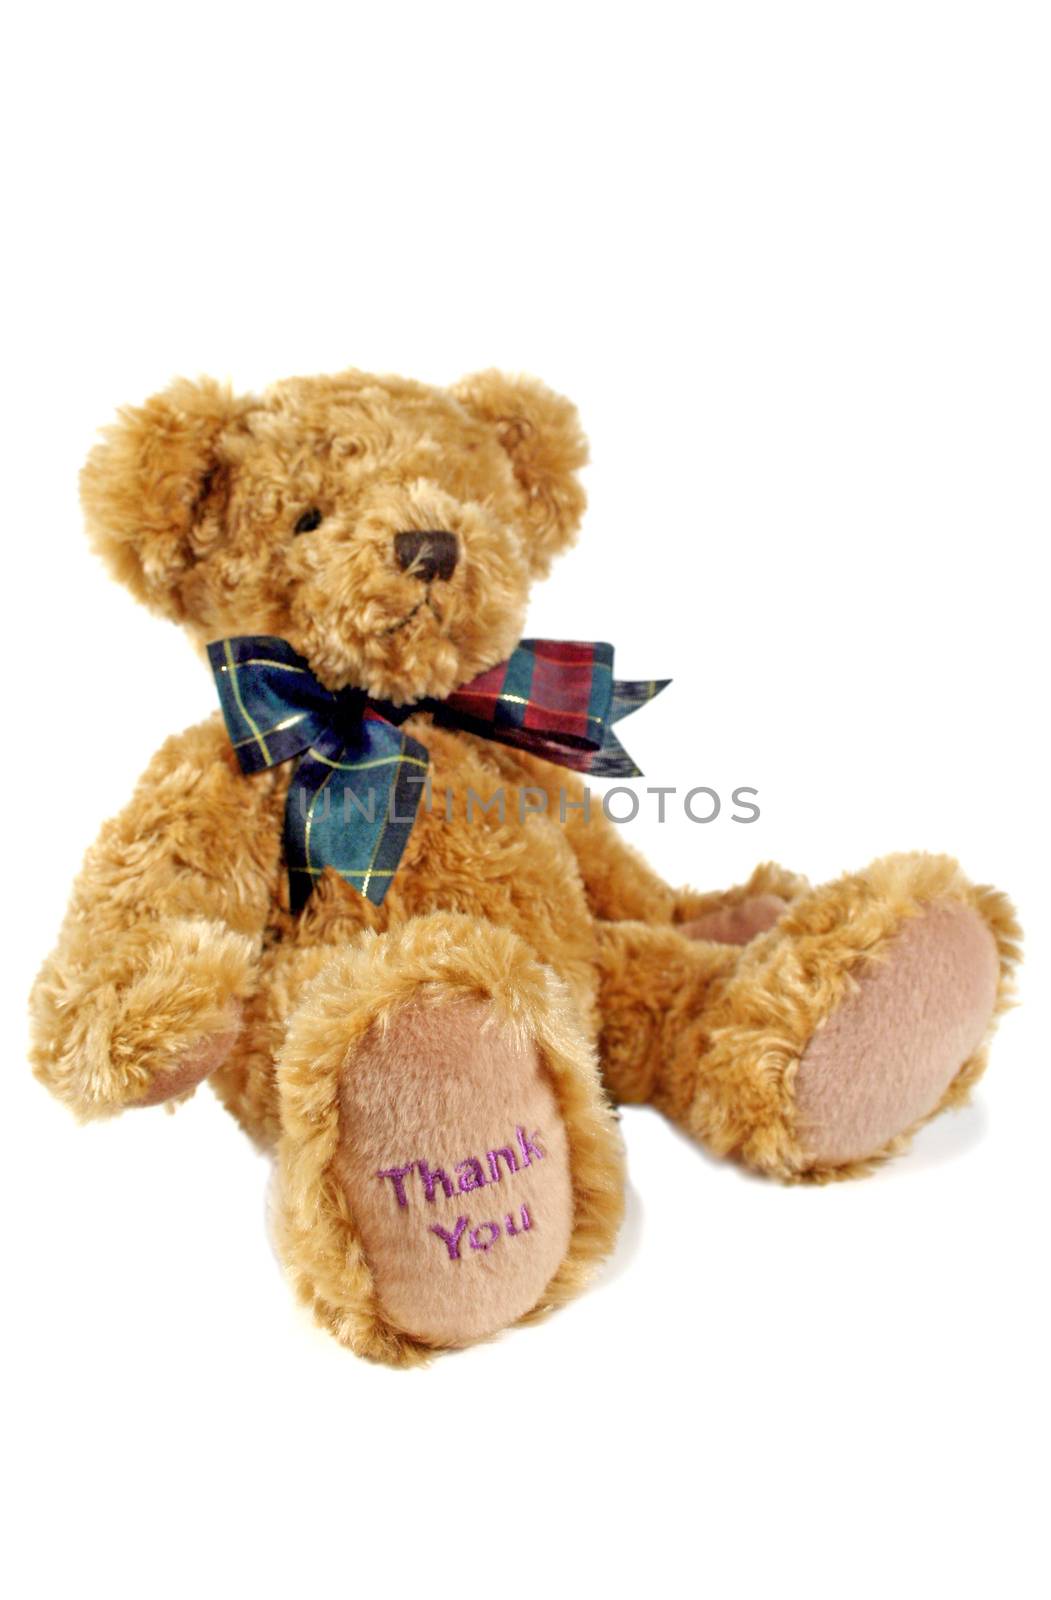 Thank you teddy bear with thank you on his paw.